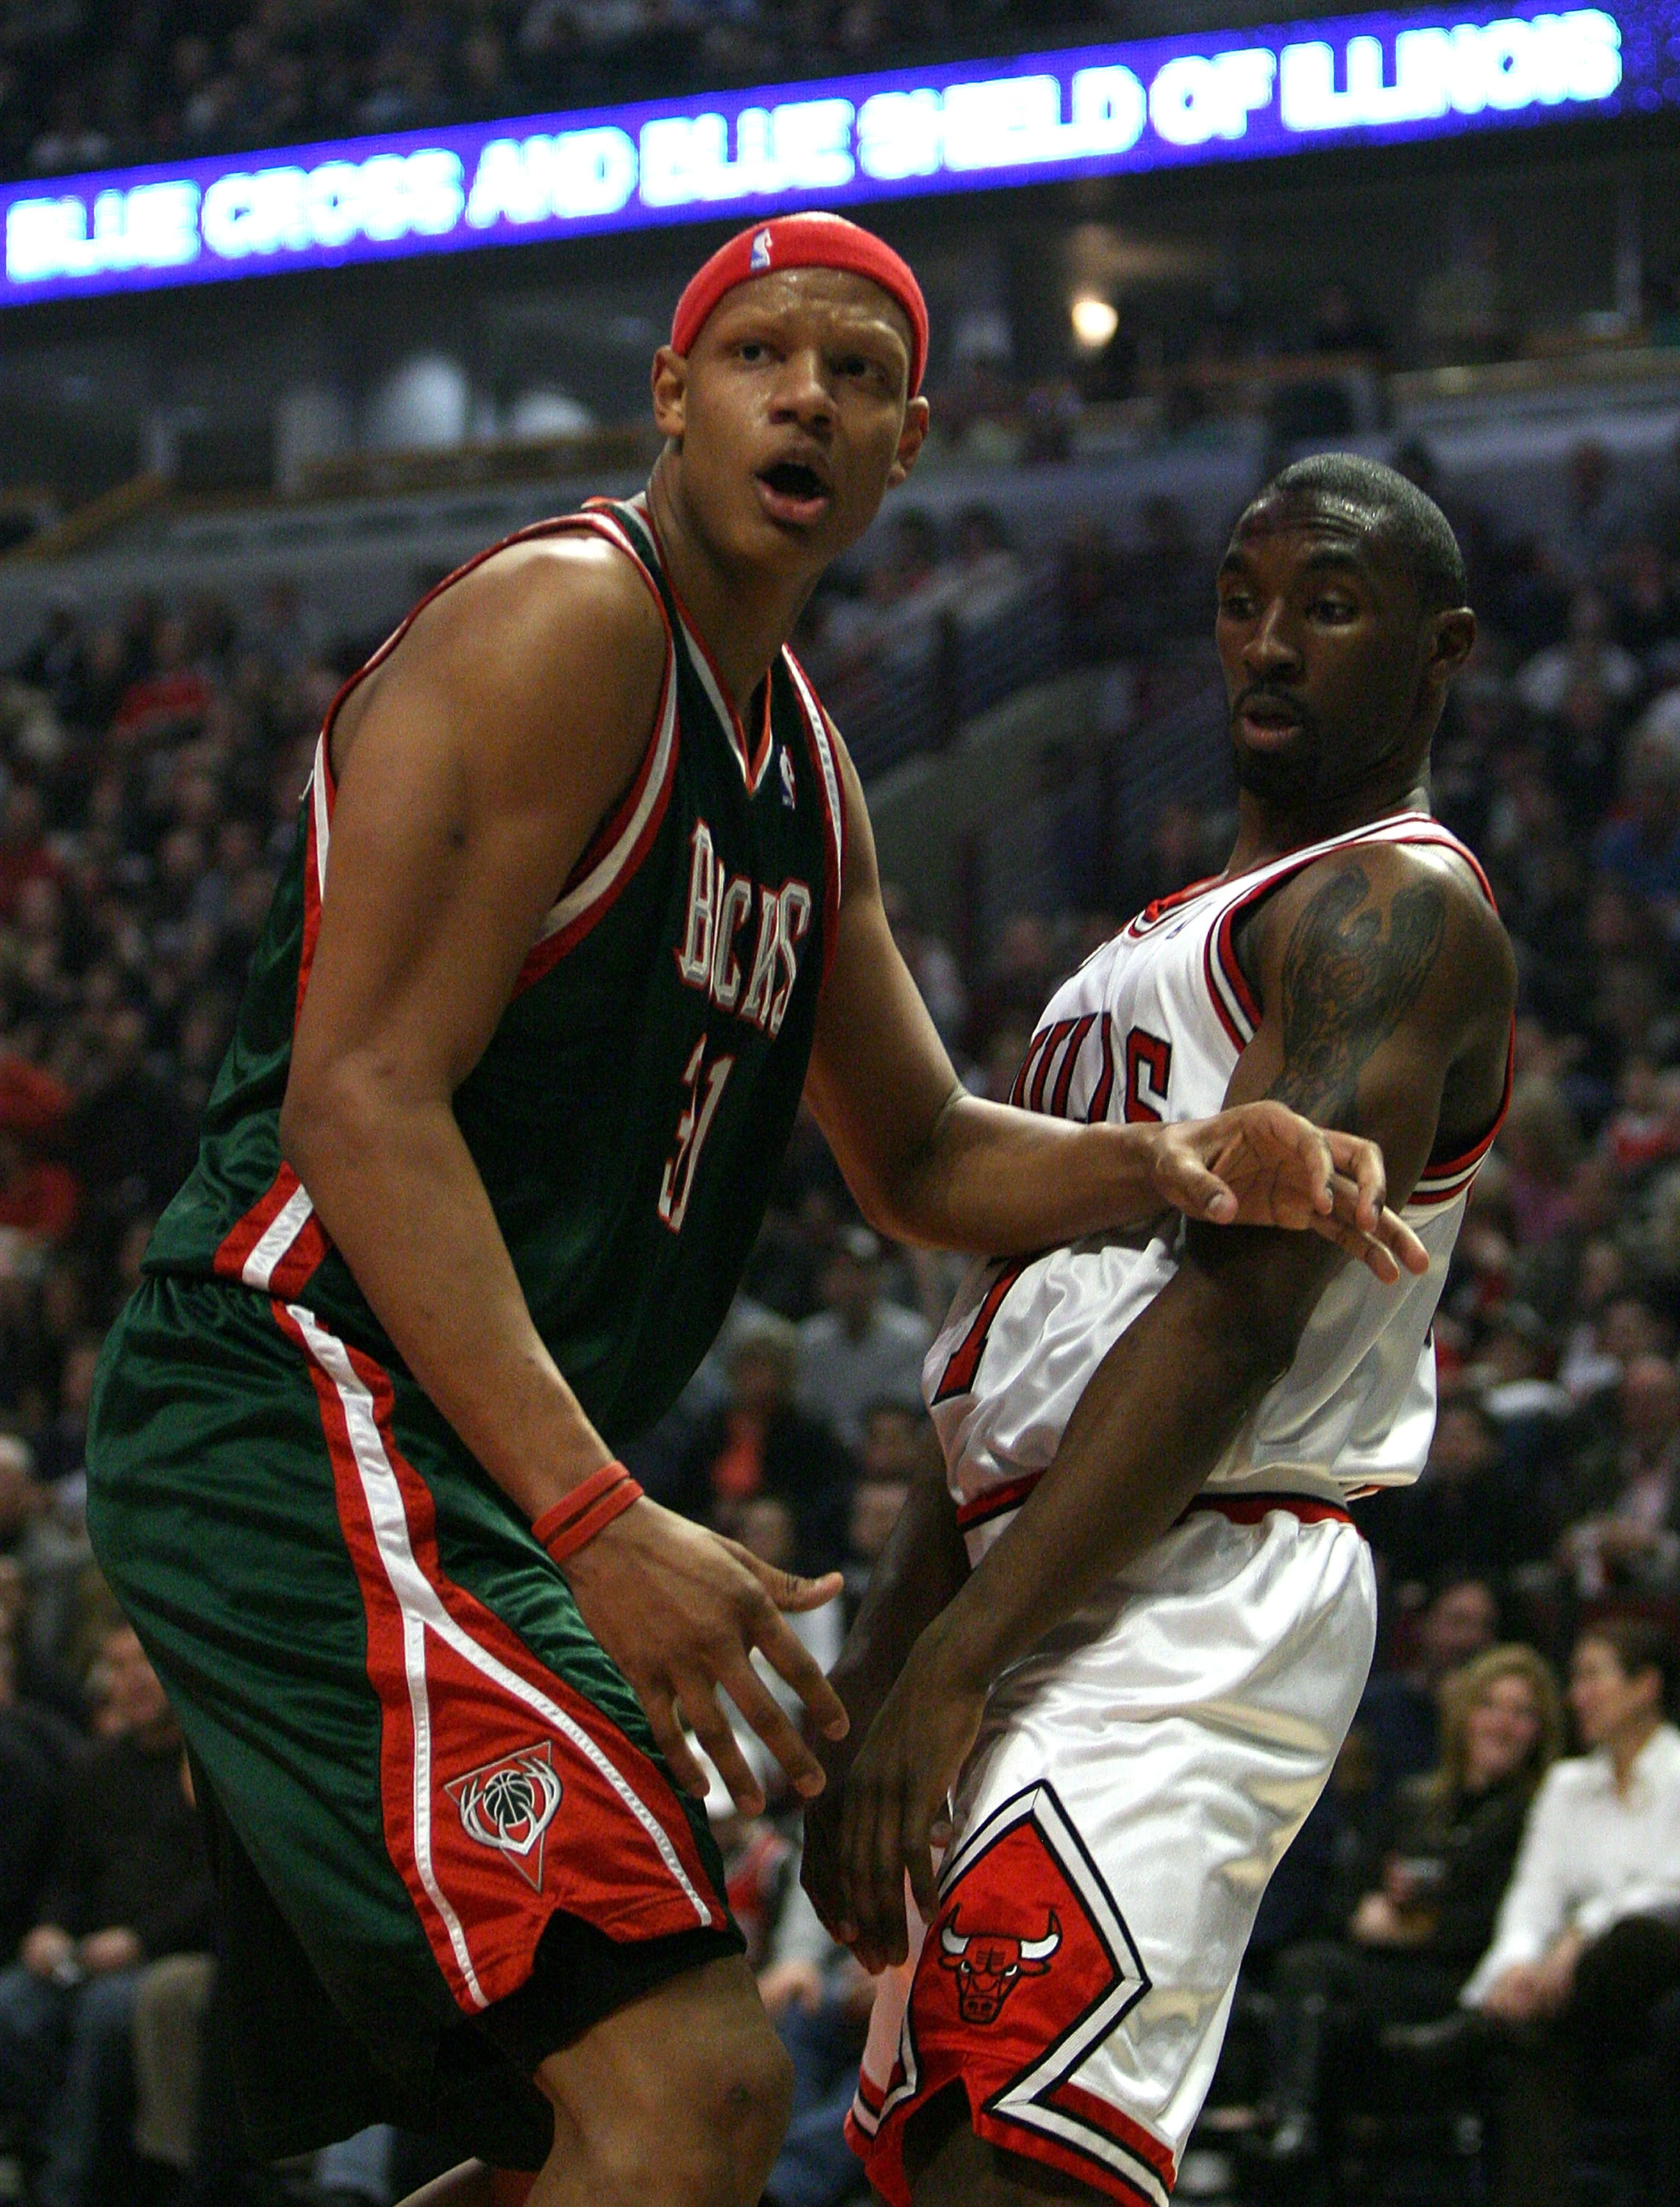 CHICAGO - MARCH 06:  Charlie Villanueva #31 of the Milwaukee Bucks reacts after he didn't get a call on an offensive play which he thought he was fouled on in the first quarter as Ben Gordon #7 of the Chicago Bulls looks on at the United Center on March 6